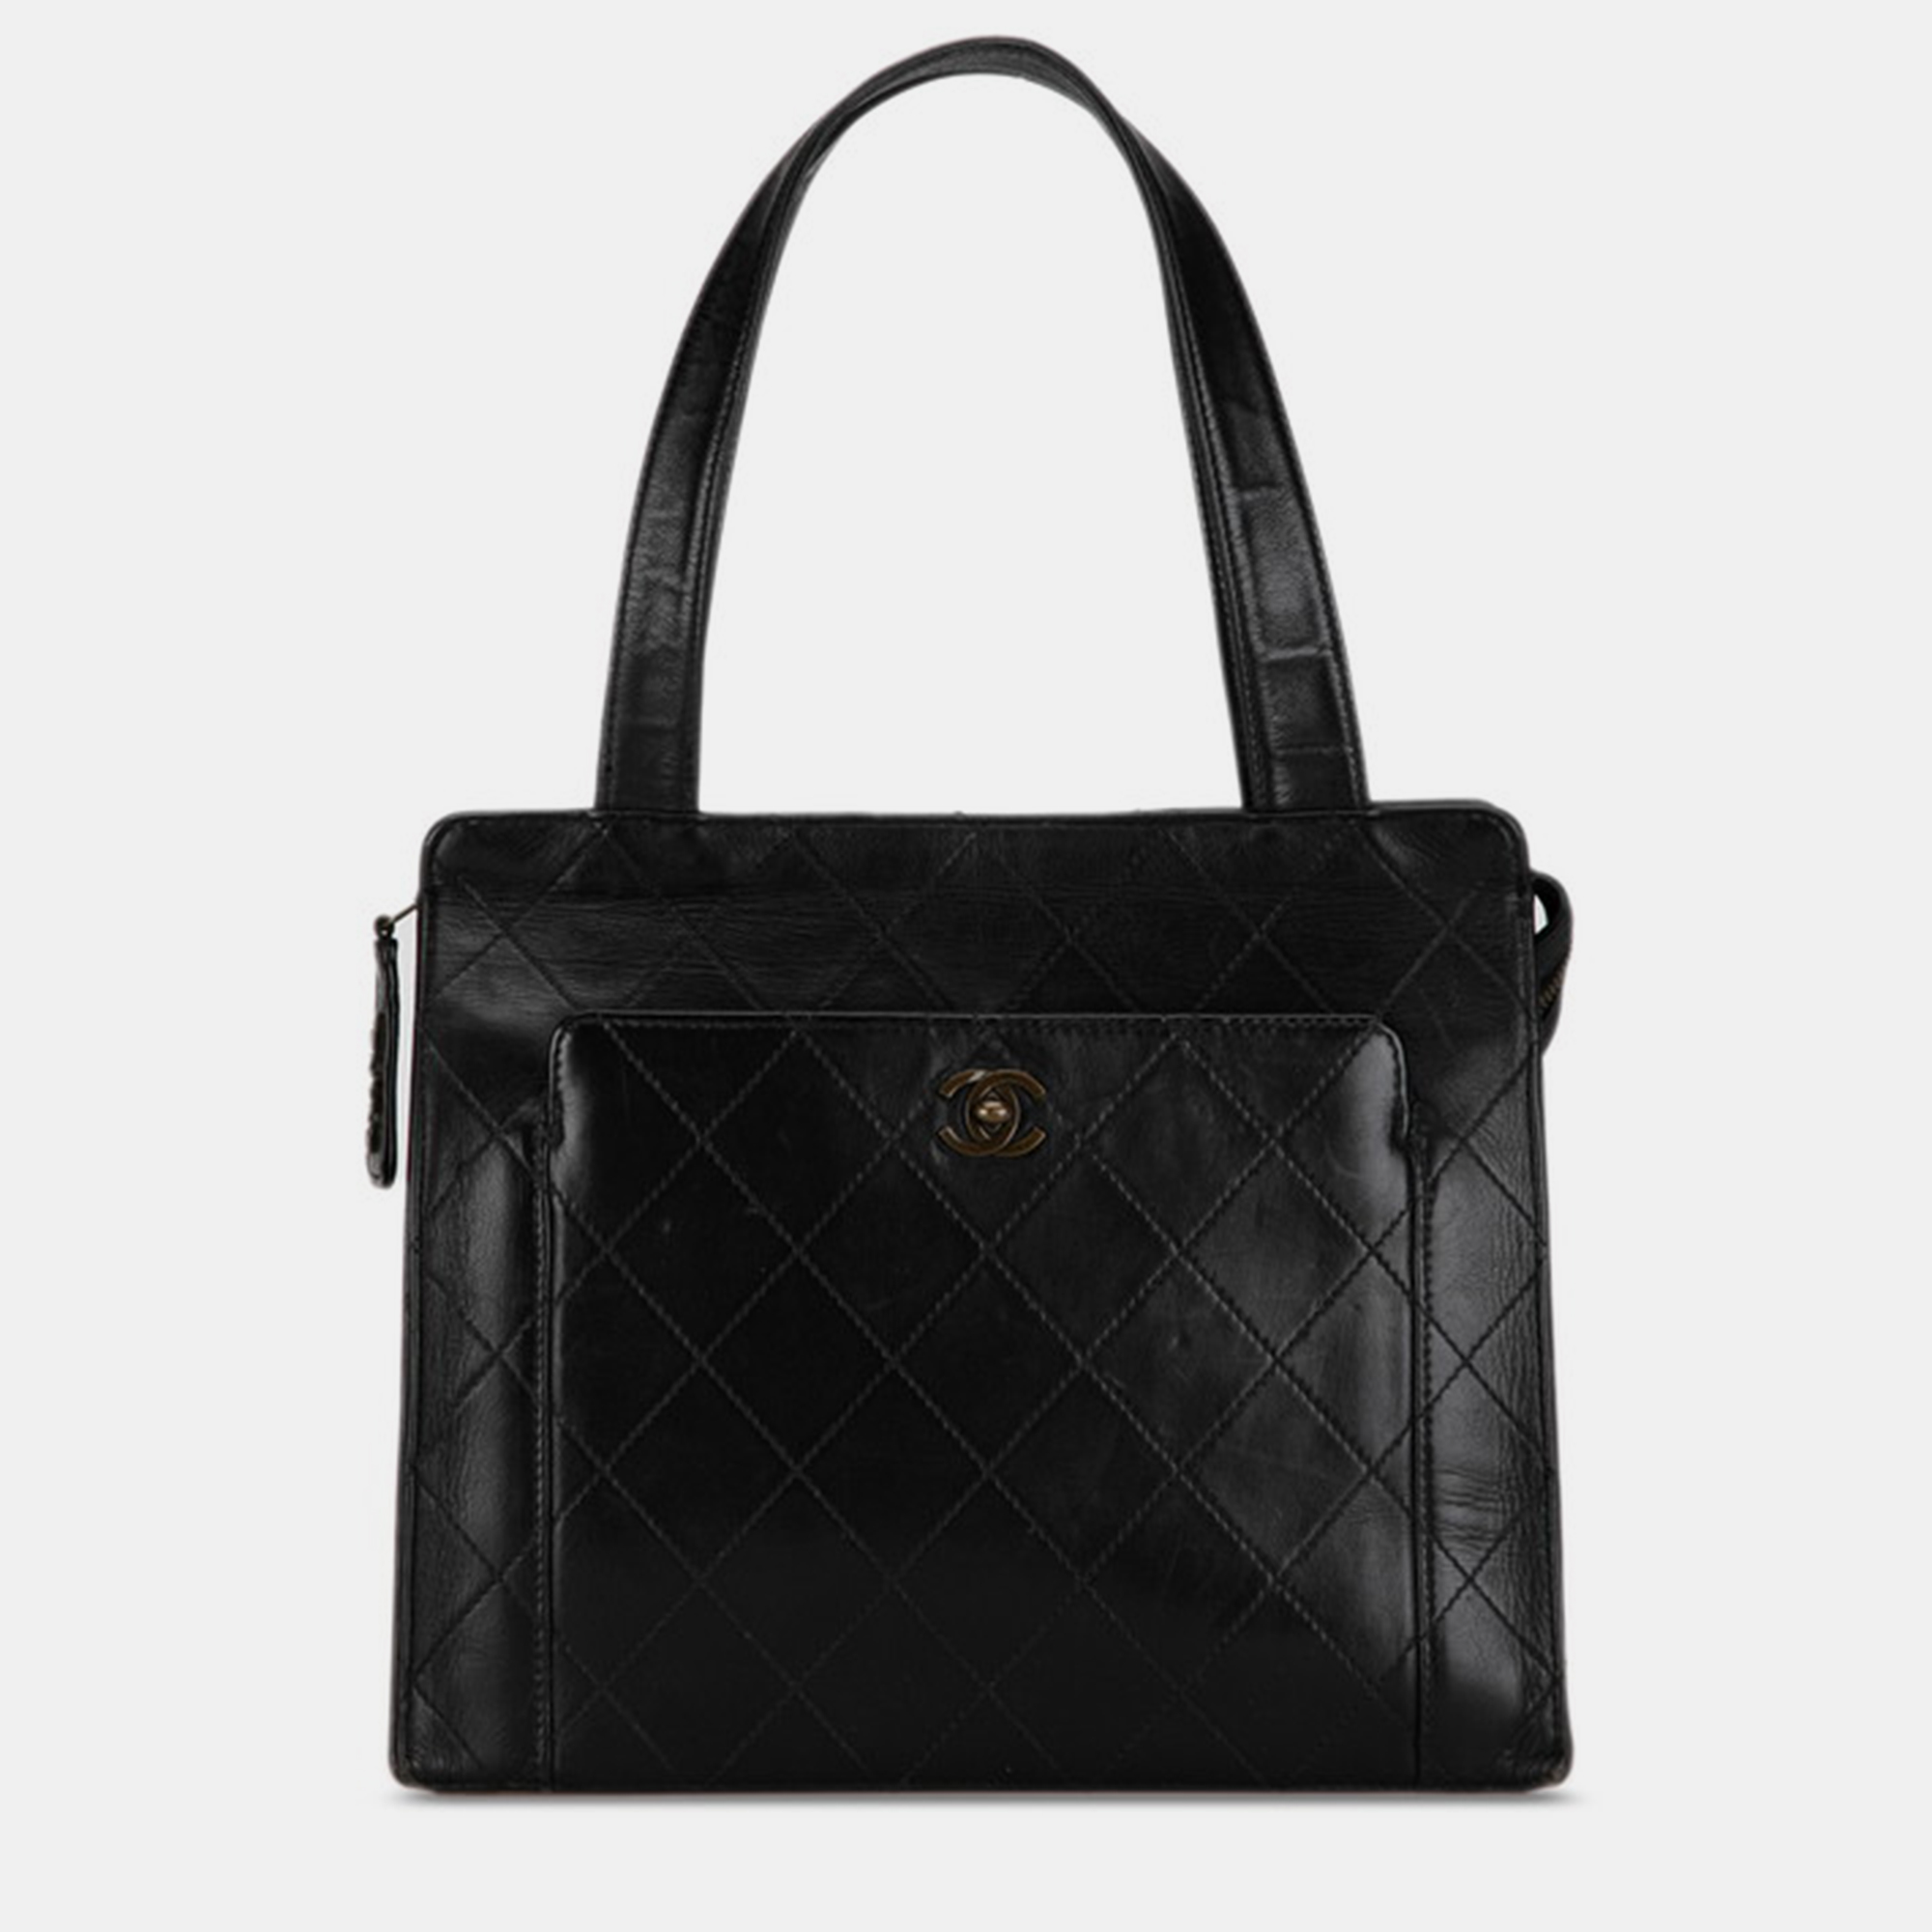 Chanel black leather quilted leather tote bag